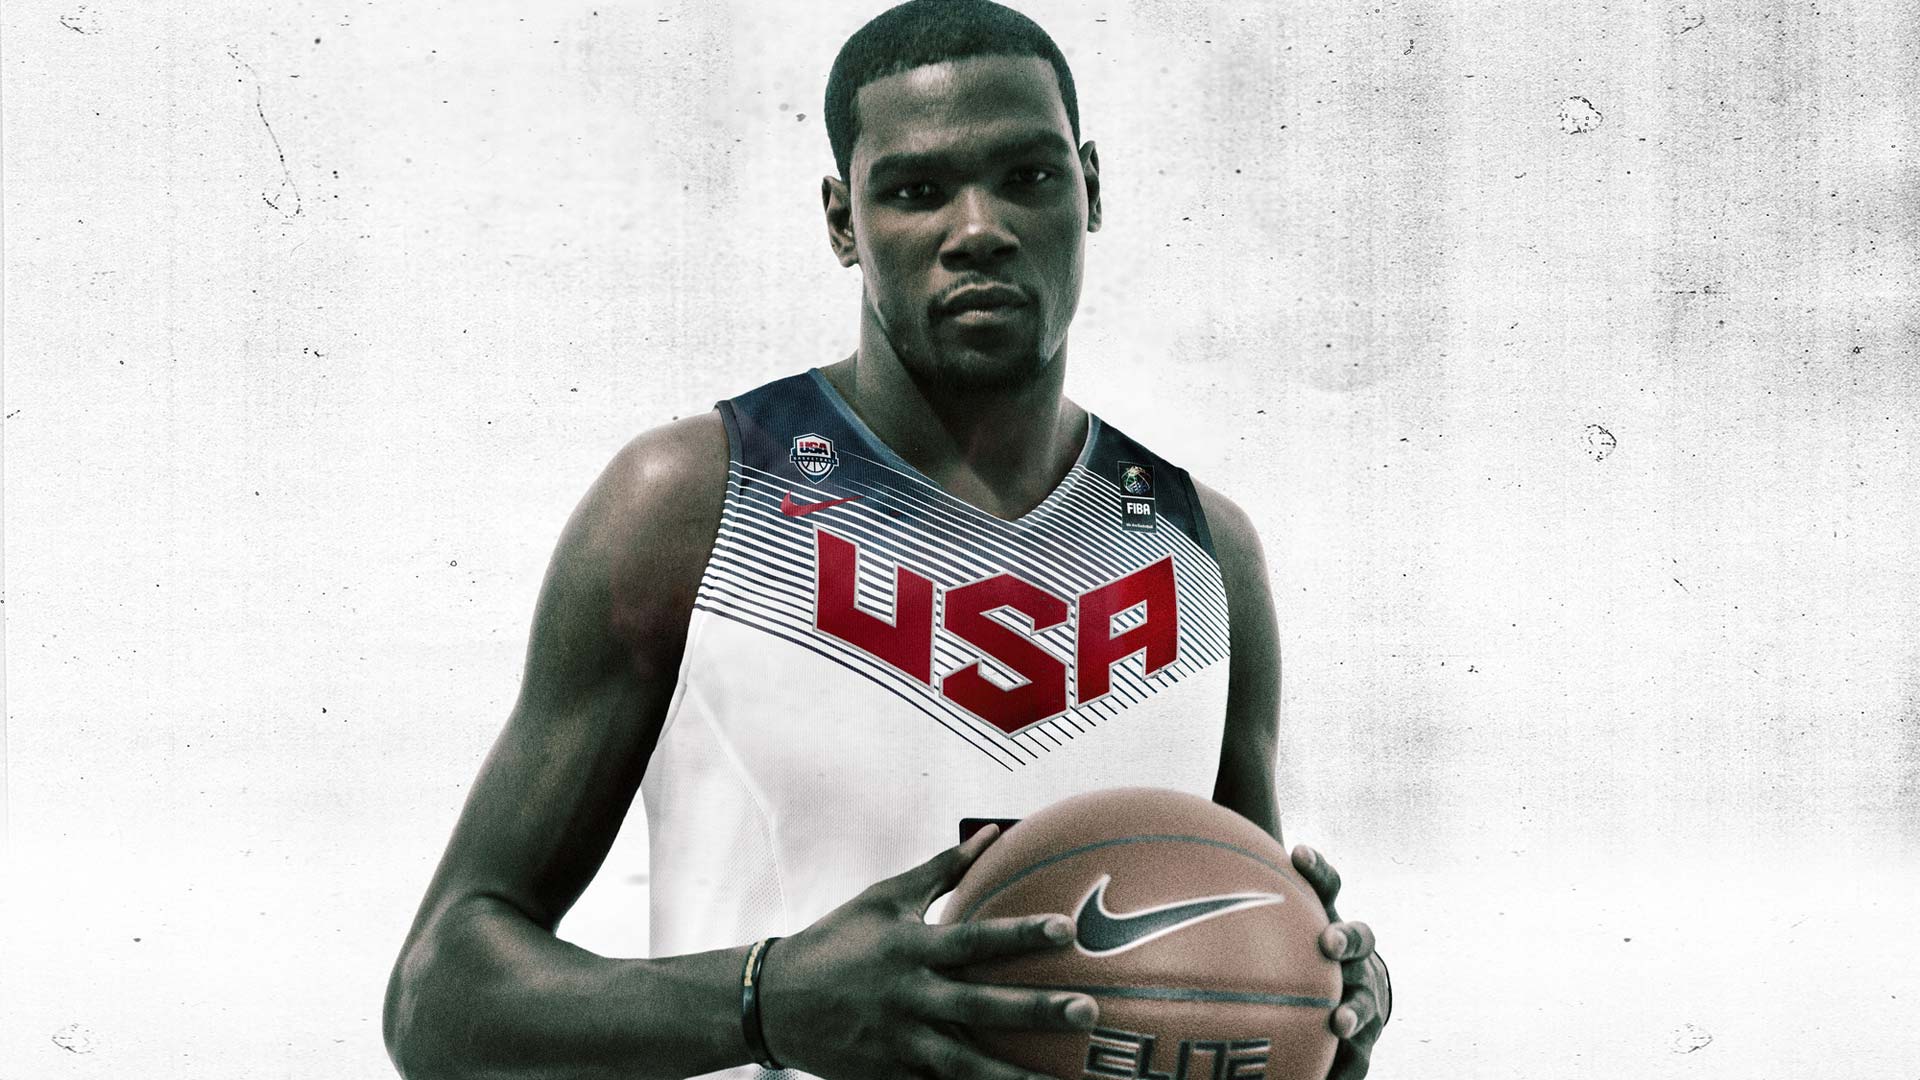 Did Nike make the right move in retaining Kevin Durant after Under